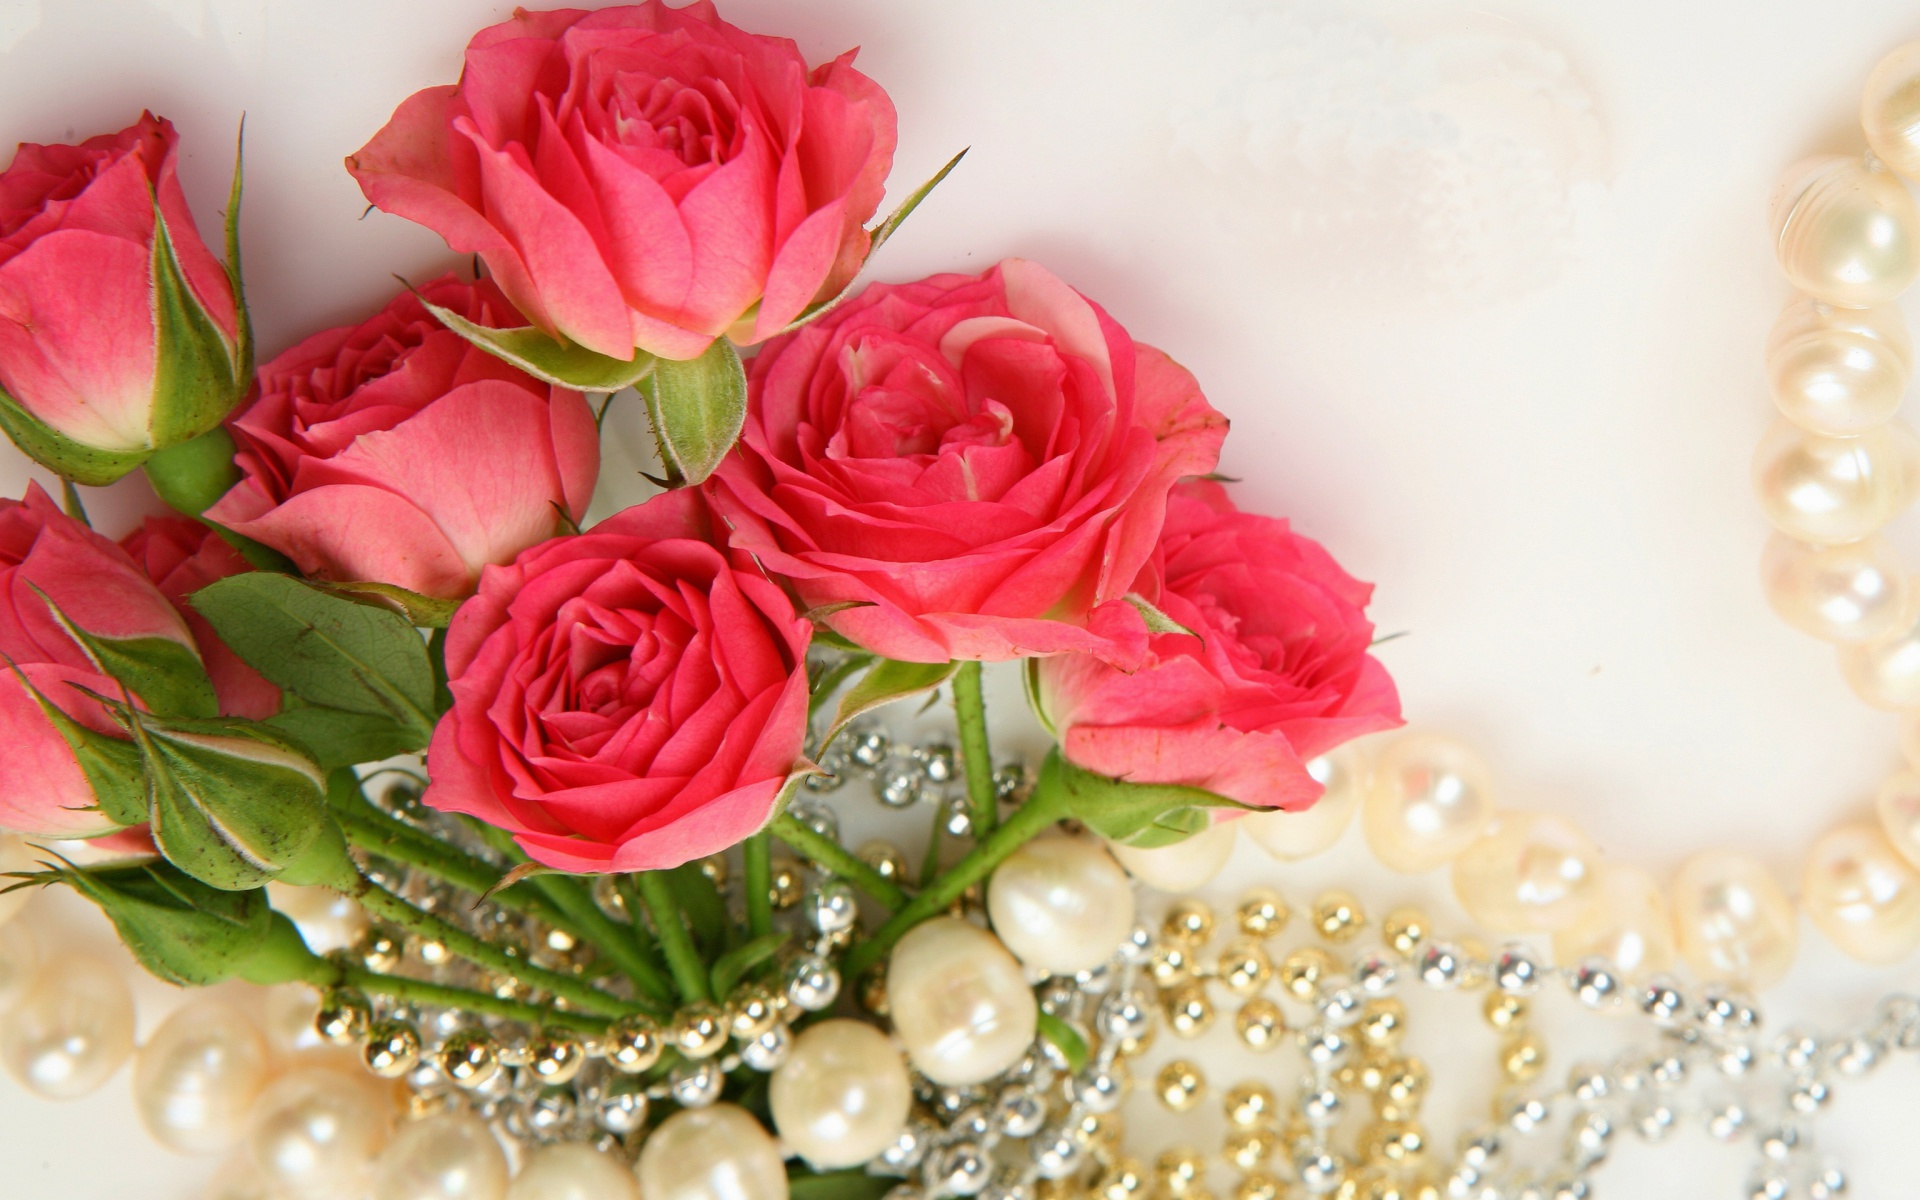 Necklace and Roses Bouquet wallpaper 1920x1200